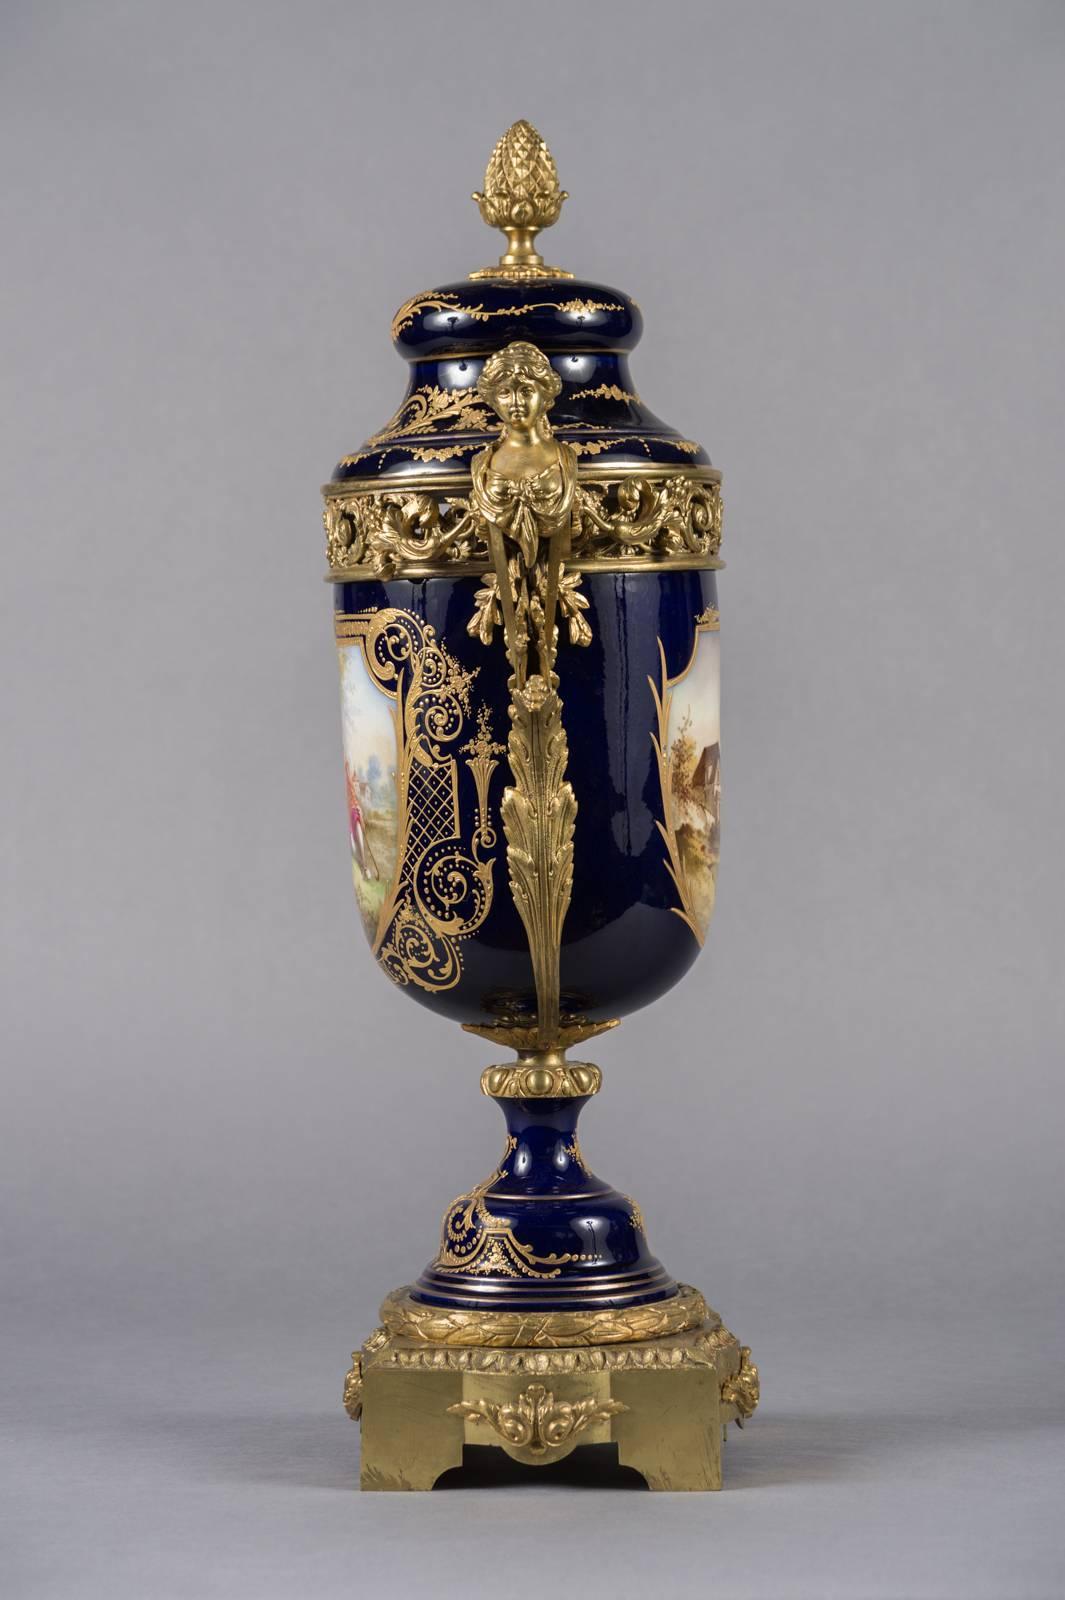 A magnificent and large pair of 19th century French Sevres cobalt blue Porcelain gilt bronze mounted covered urns. Each panel is beautifully hand painted with love scenes and the reverse panels with landscapes. and further adorned with raised gold